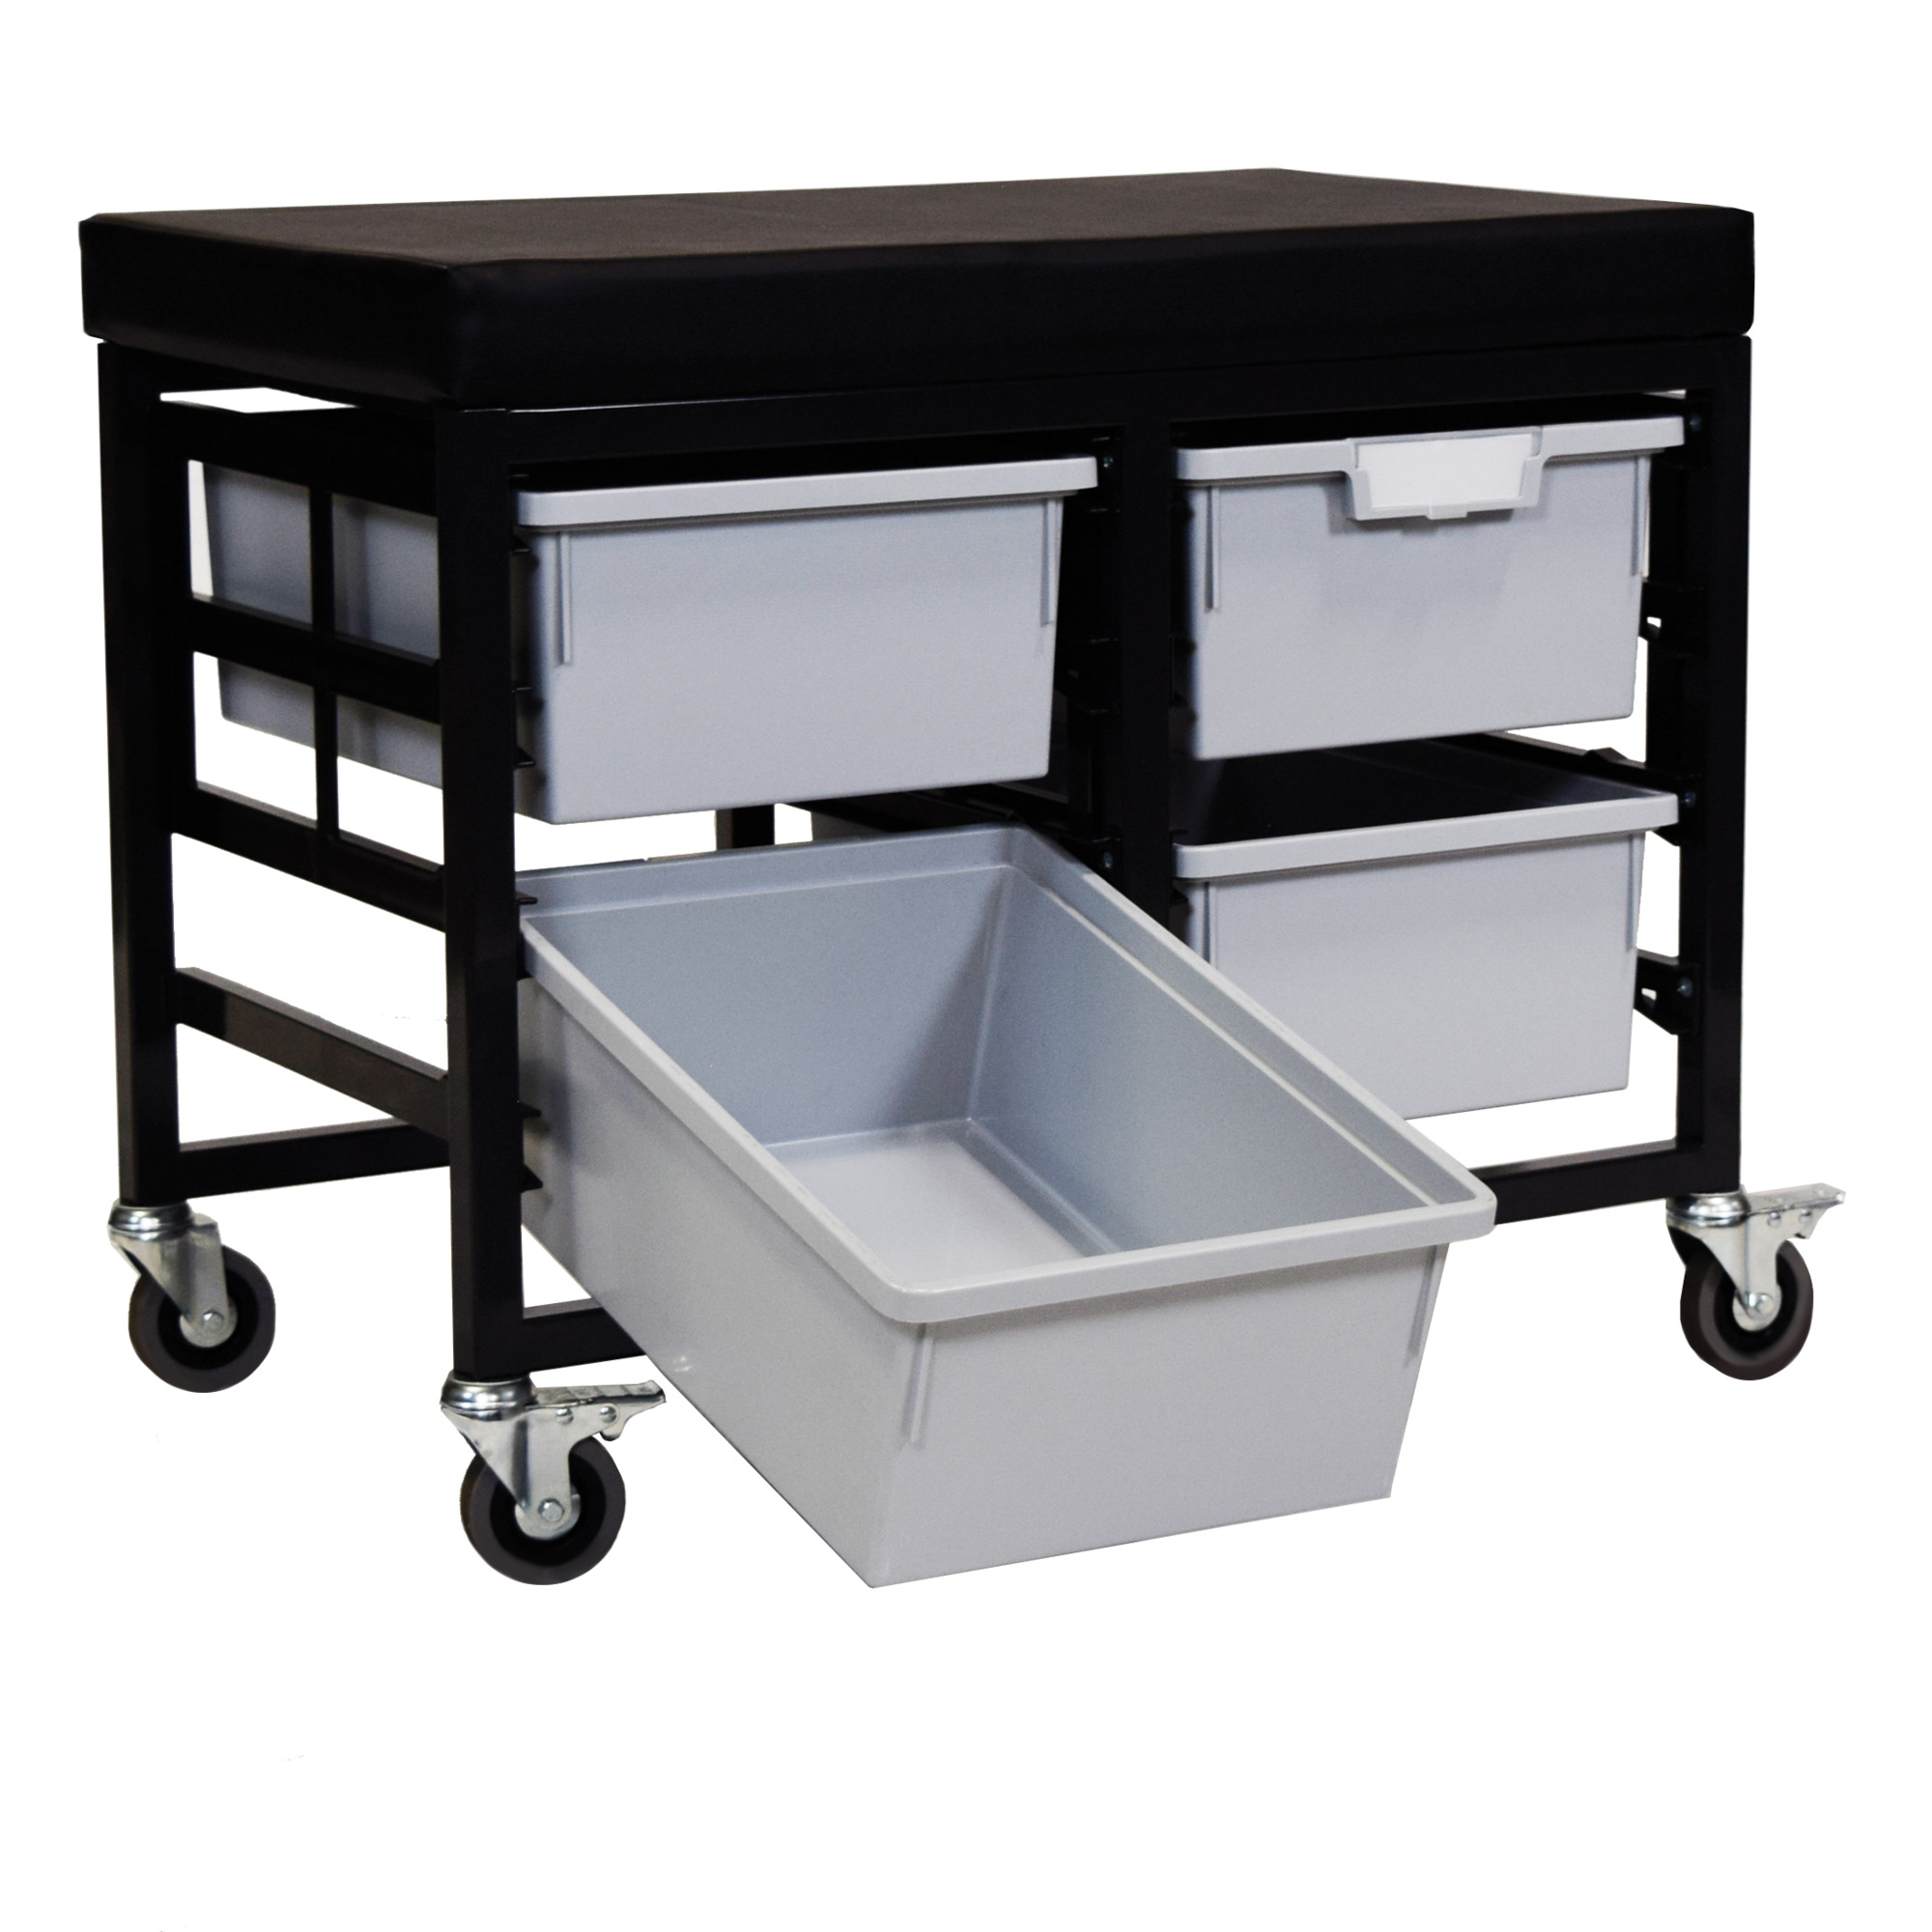 Certwood StorWerks, StorBenchSeat w/ 6 Storsystem Trays and Bins-Gray, Included (qty.) 4, Material Plastic, Height 12 in, Model CE2109DGGC-4DLG